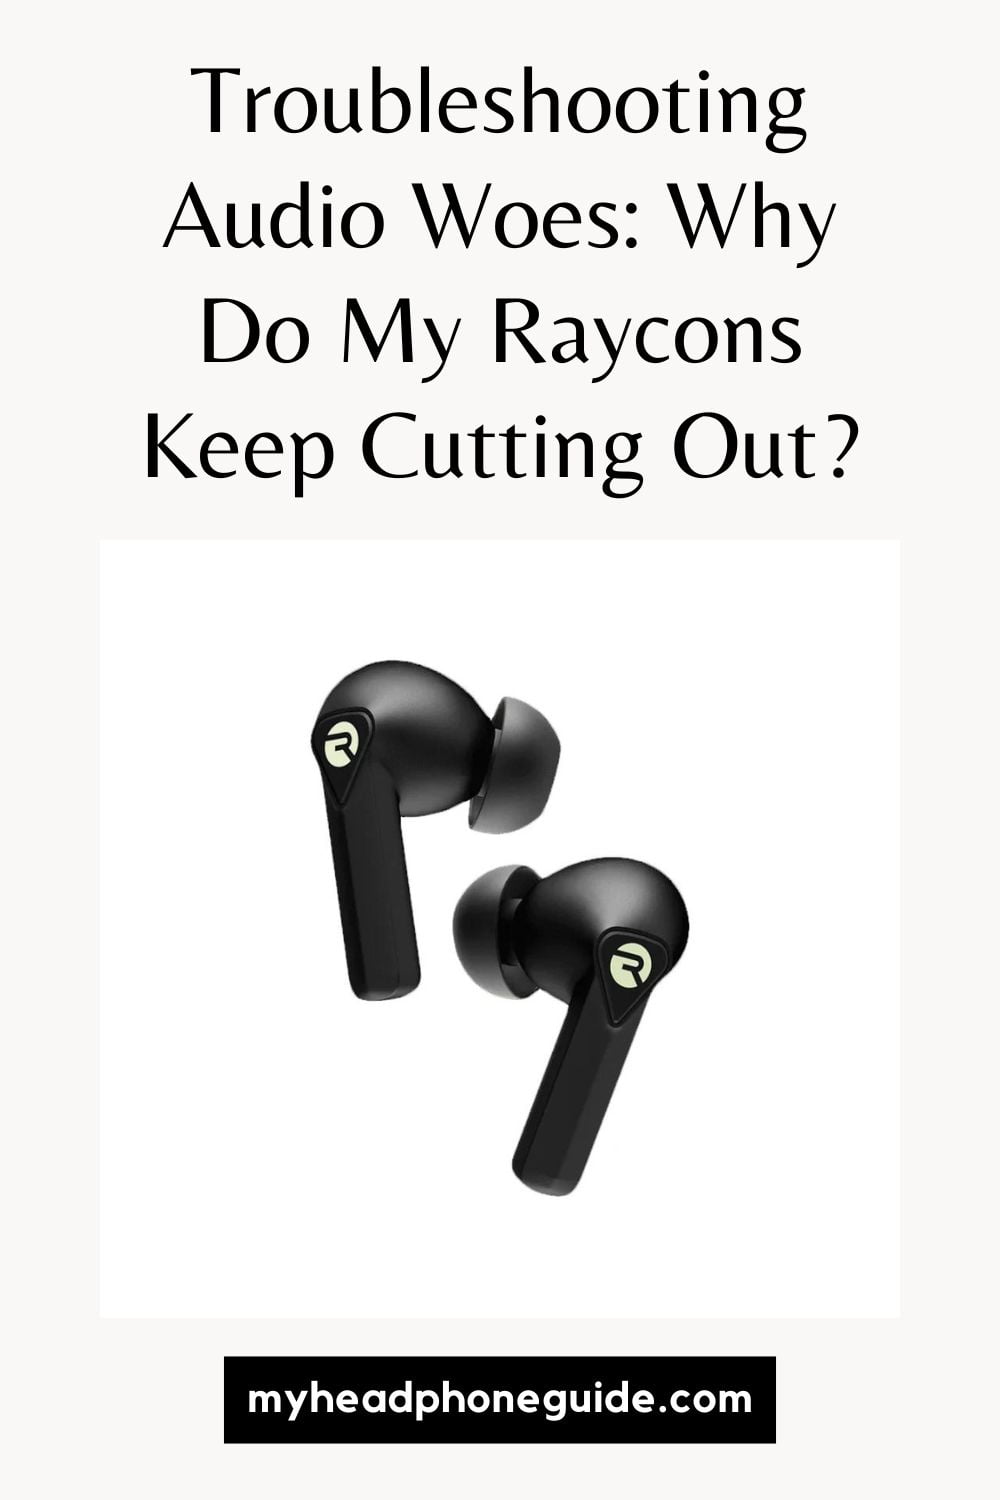 Troubleshooting Audio Woes: Why Do My Raycons Keep Cutting Out?